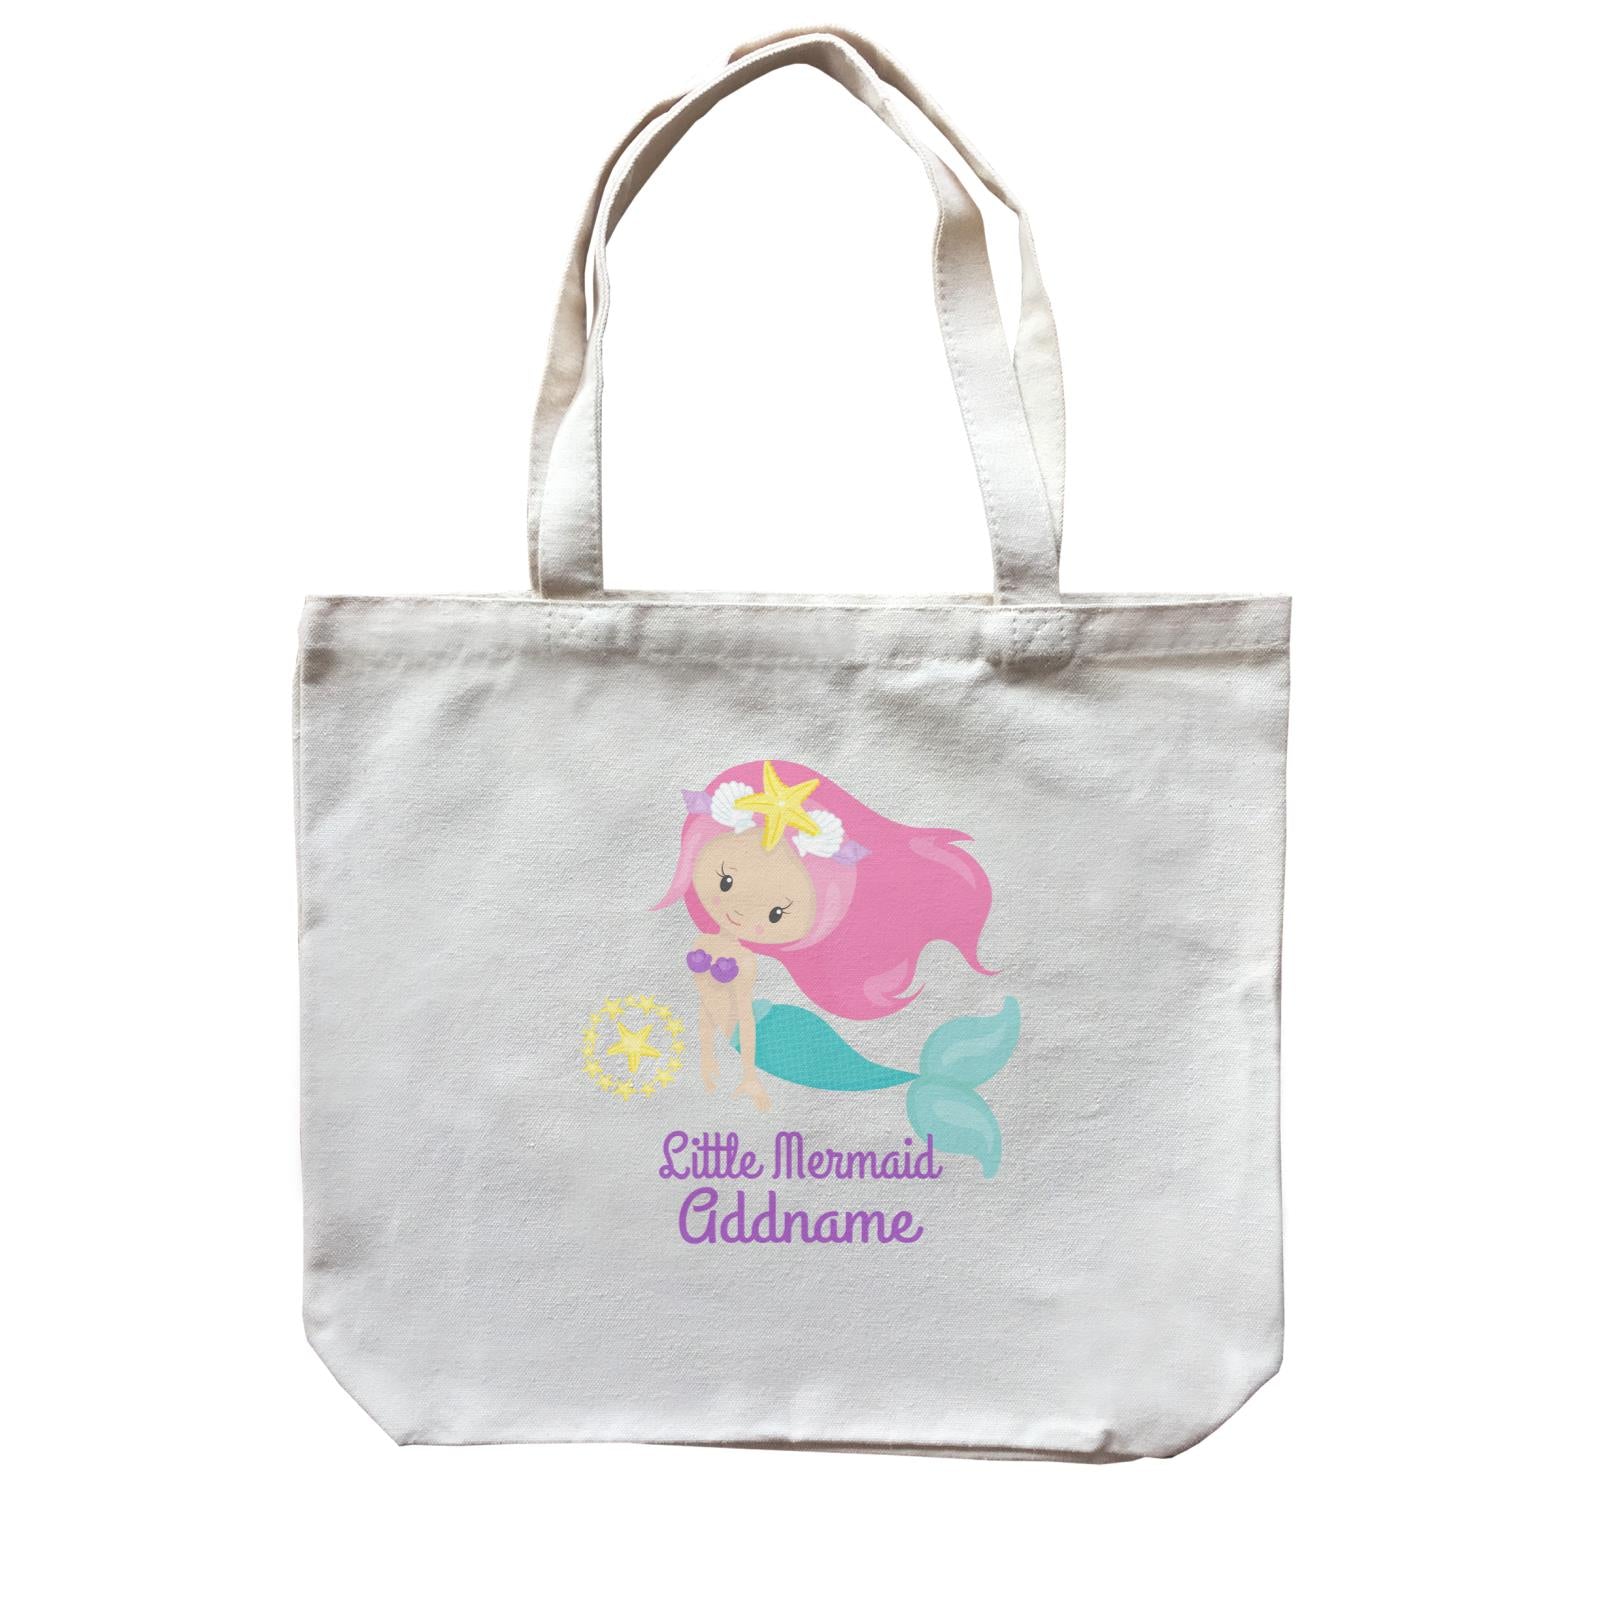 Little Mermaid Swimming with Starfish Emblem Addname Canvas Bag